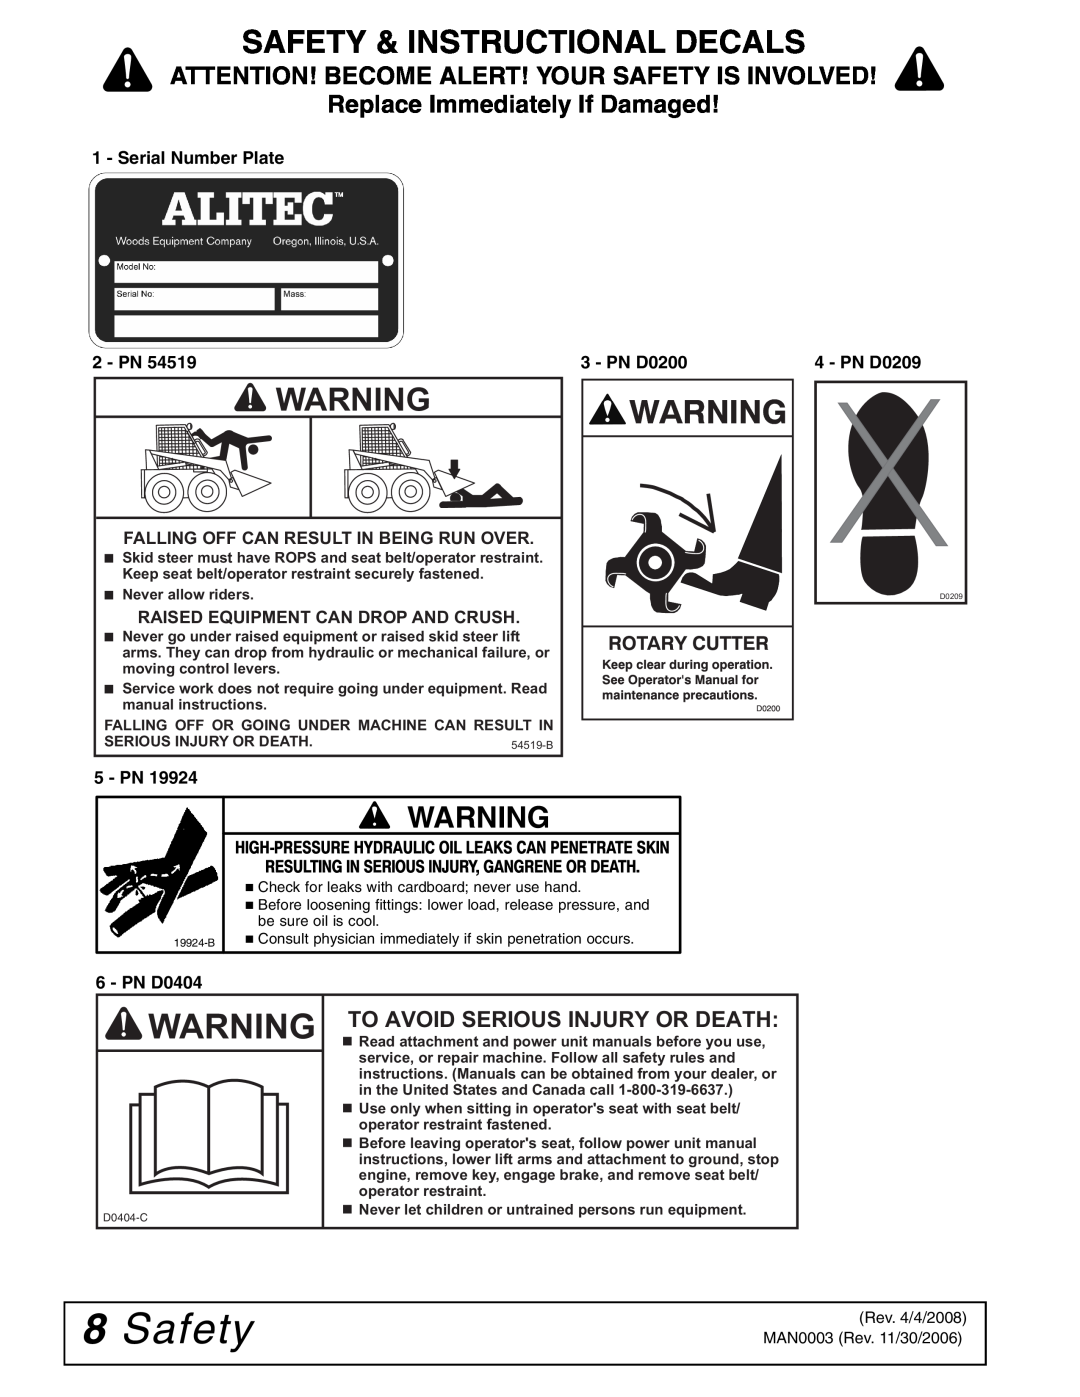 Woods Equipment TL84 Safety & Instructional Decals, Replace Immediately If Damaged, To Avoid Serious Injury Or Death 